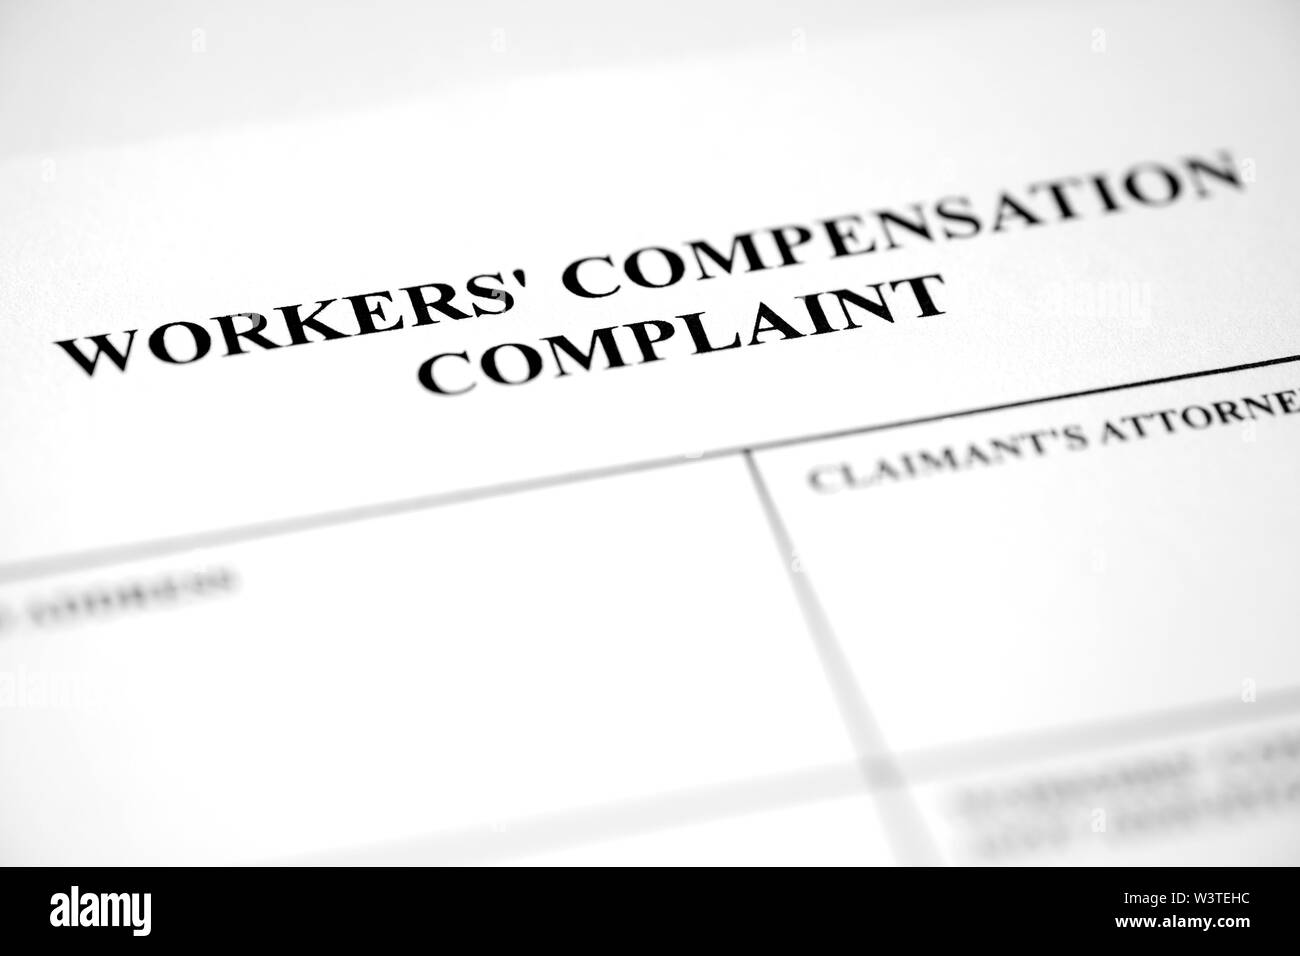 Worker's Compensation Complaint Form Injury Payment Stock Photo